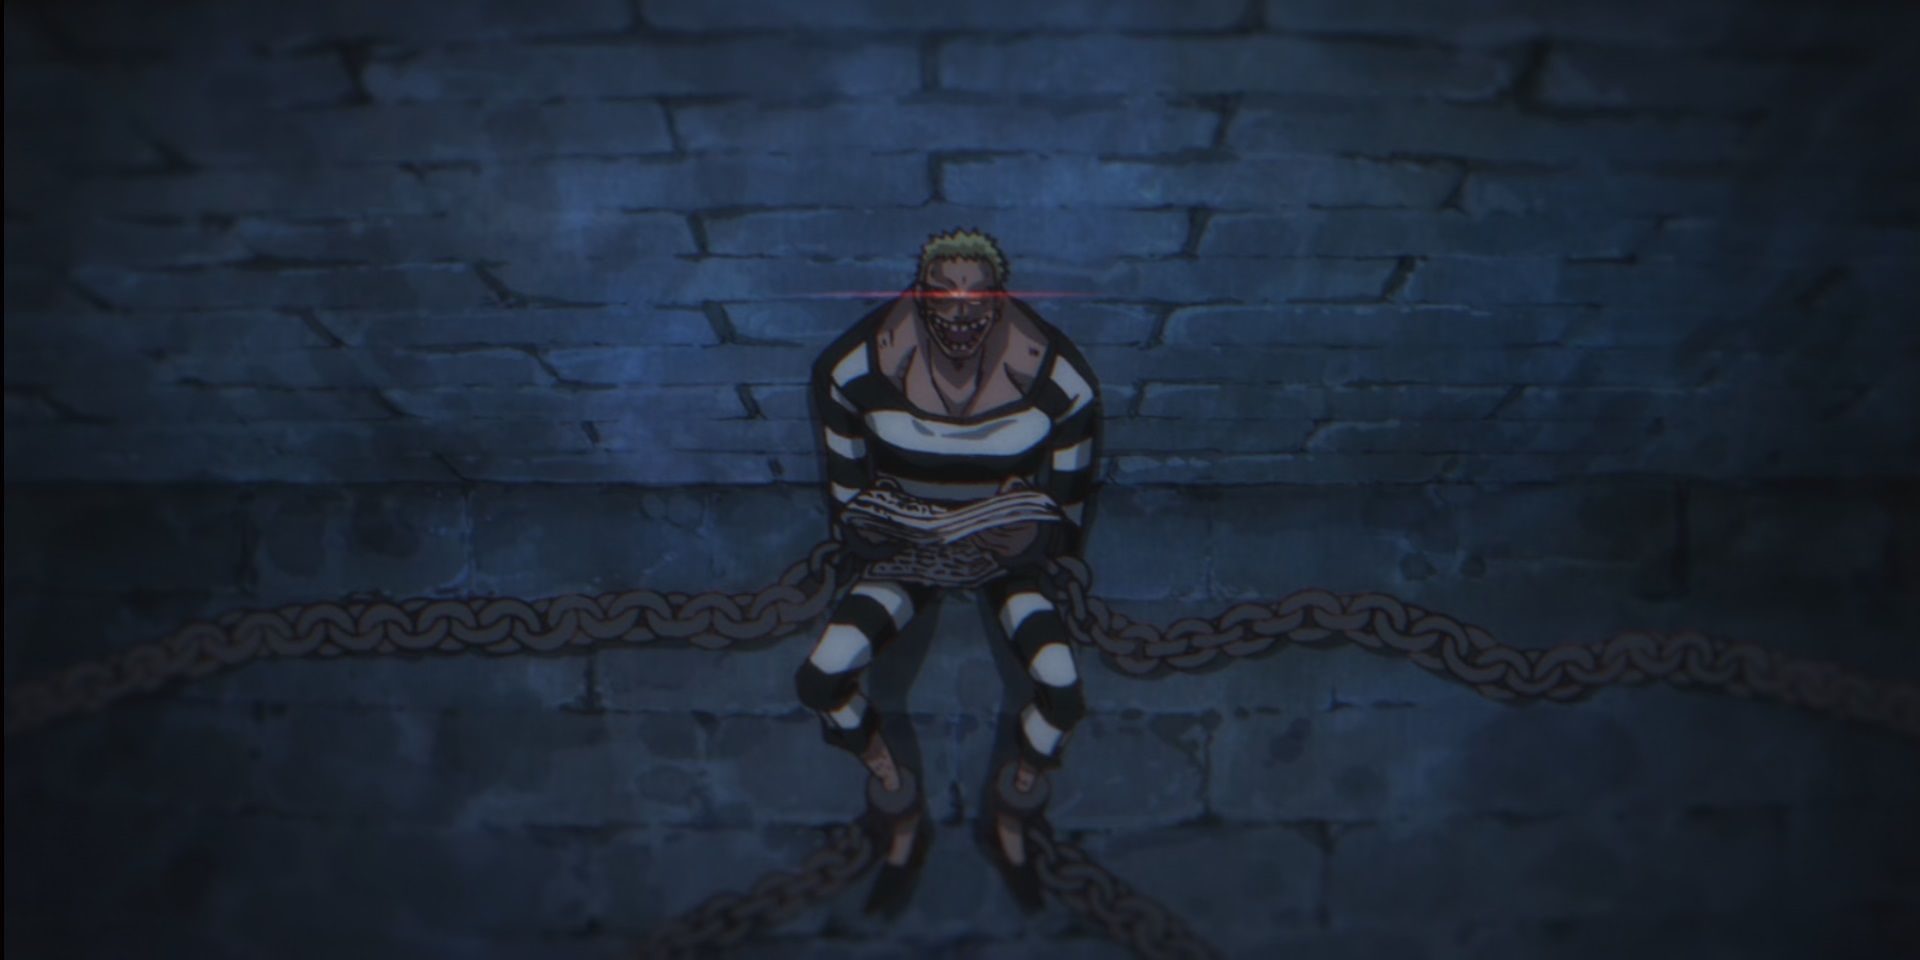 One Piece's Doflamingo laughs in Impel Down.